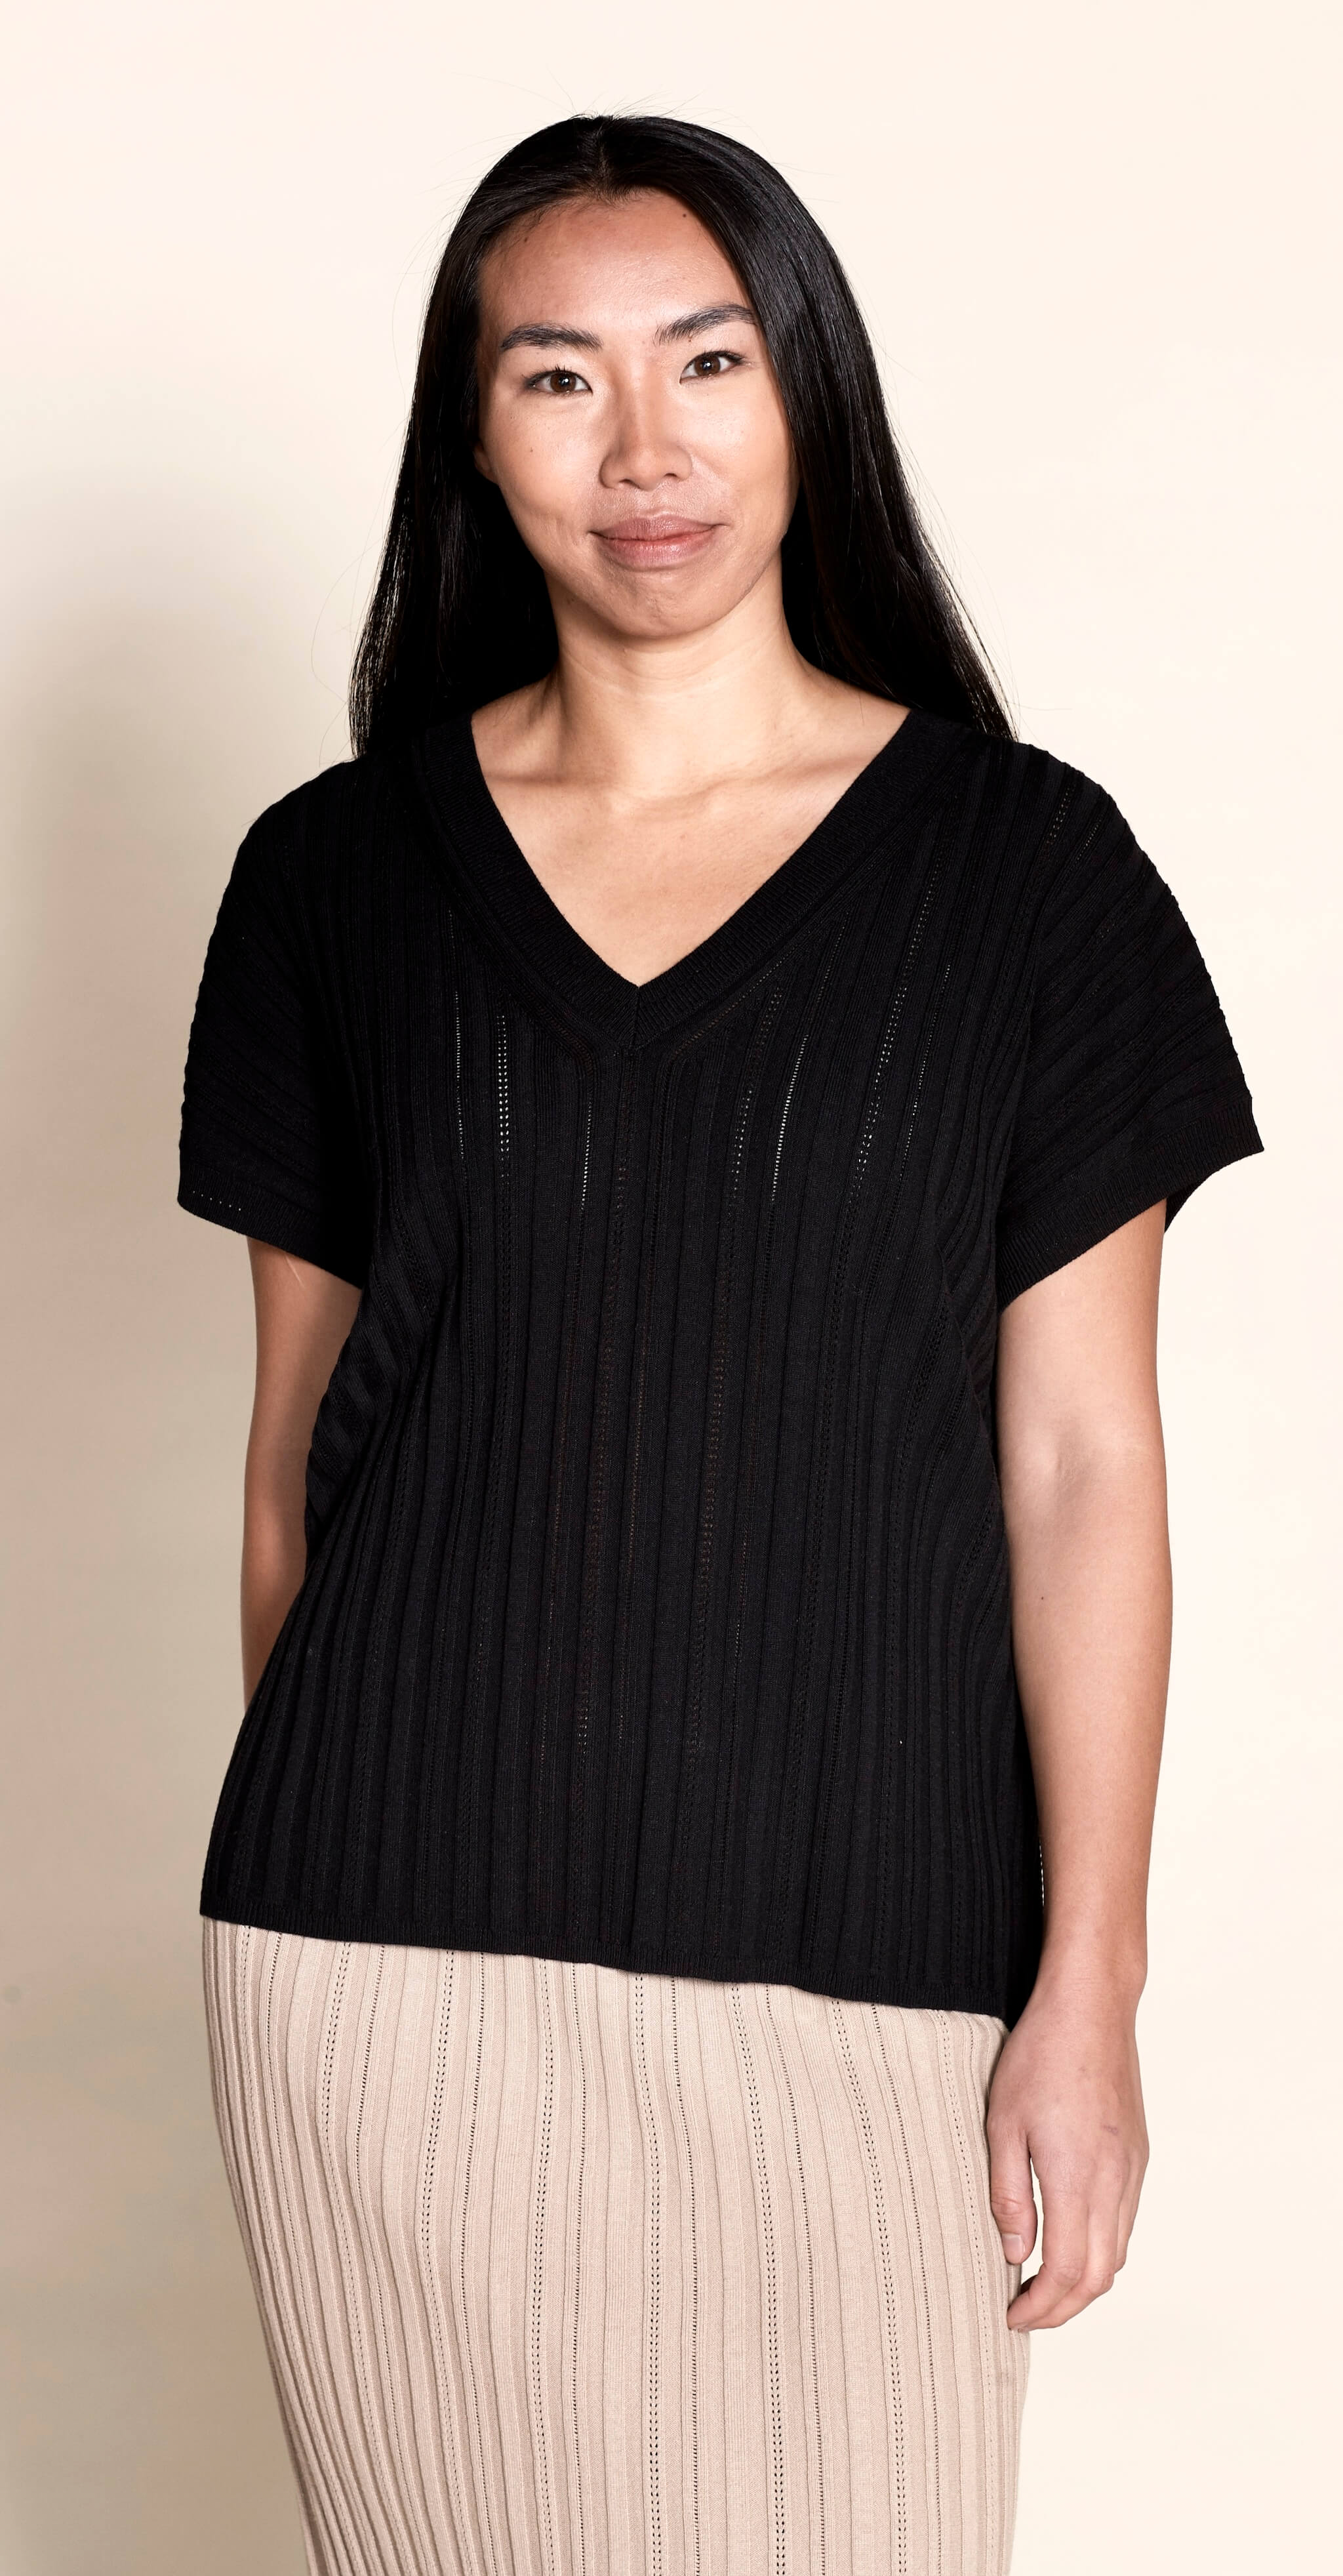 A model dons a Cyme Copenhagen black pointelle ribbed V-neck top, a perfect blend of modern style and sustainable craftsmanship from a leading Scandinavian fashion brand.